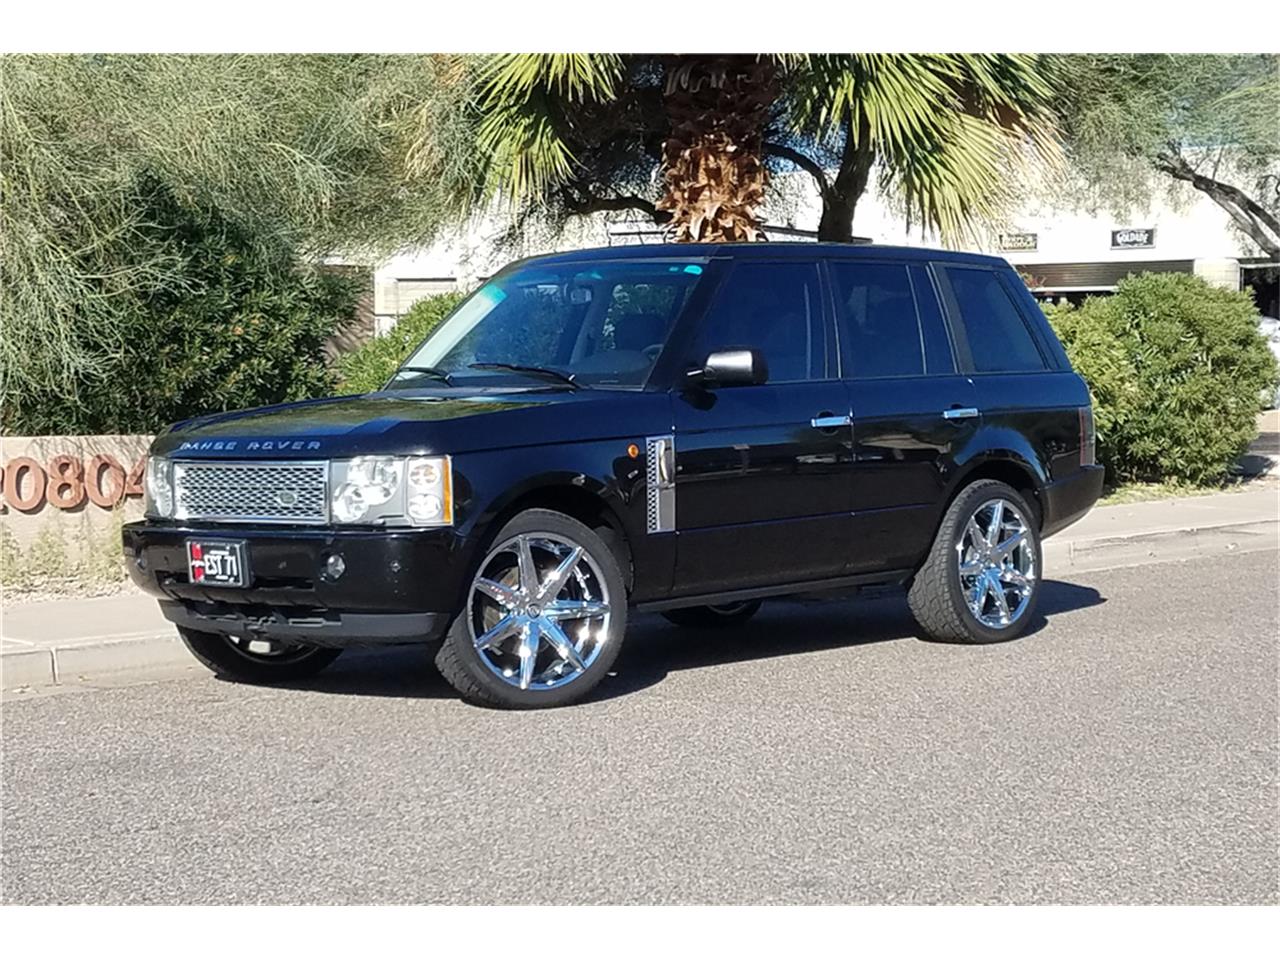 used range rover for sale in illinois